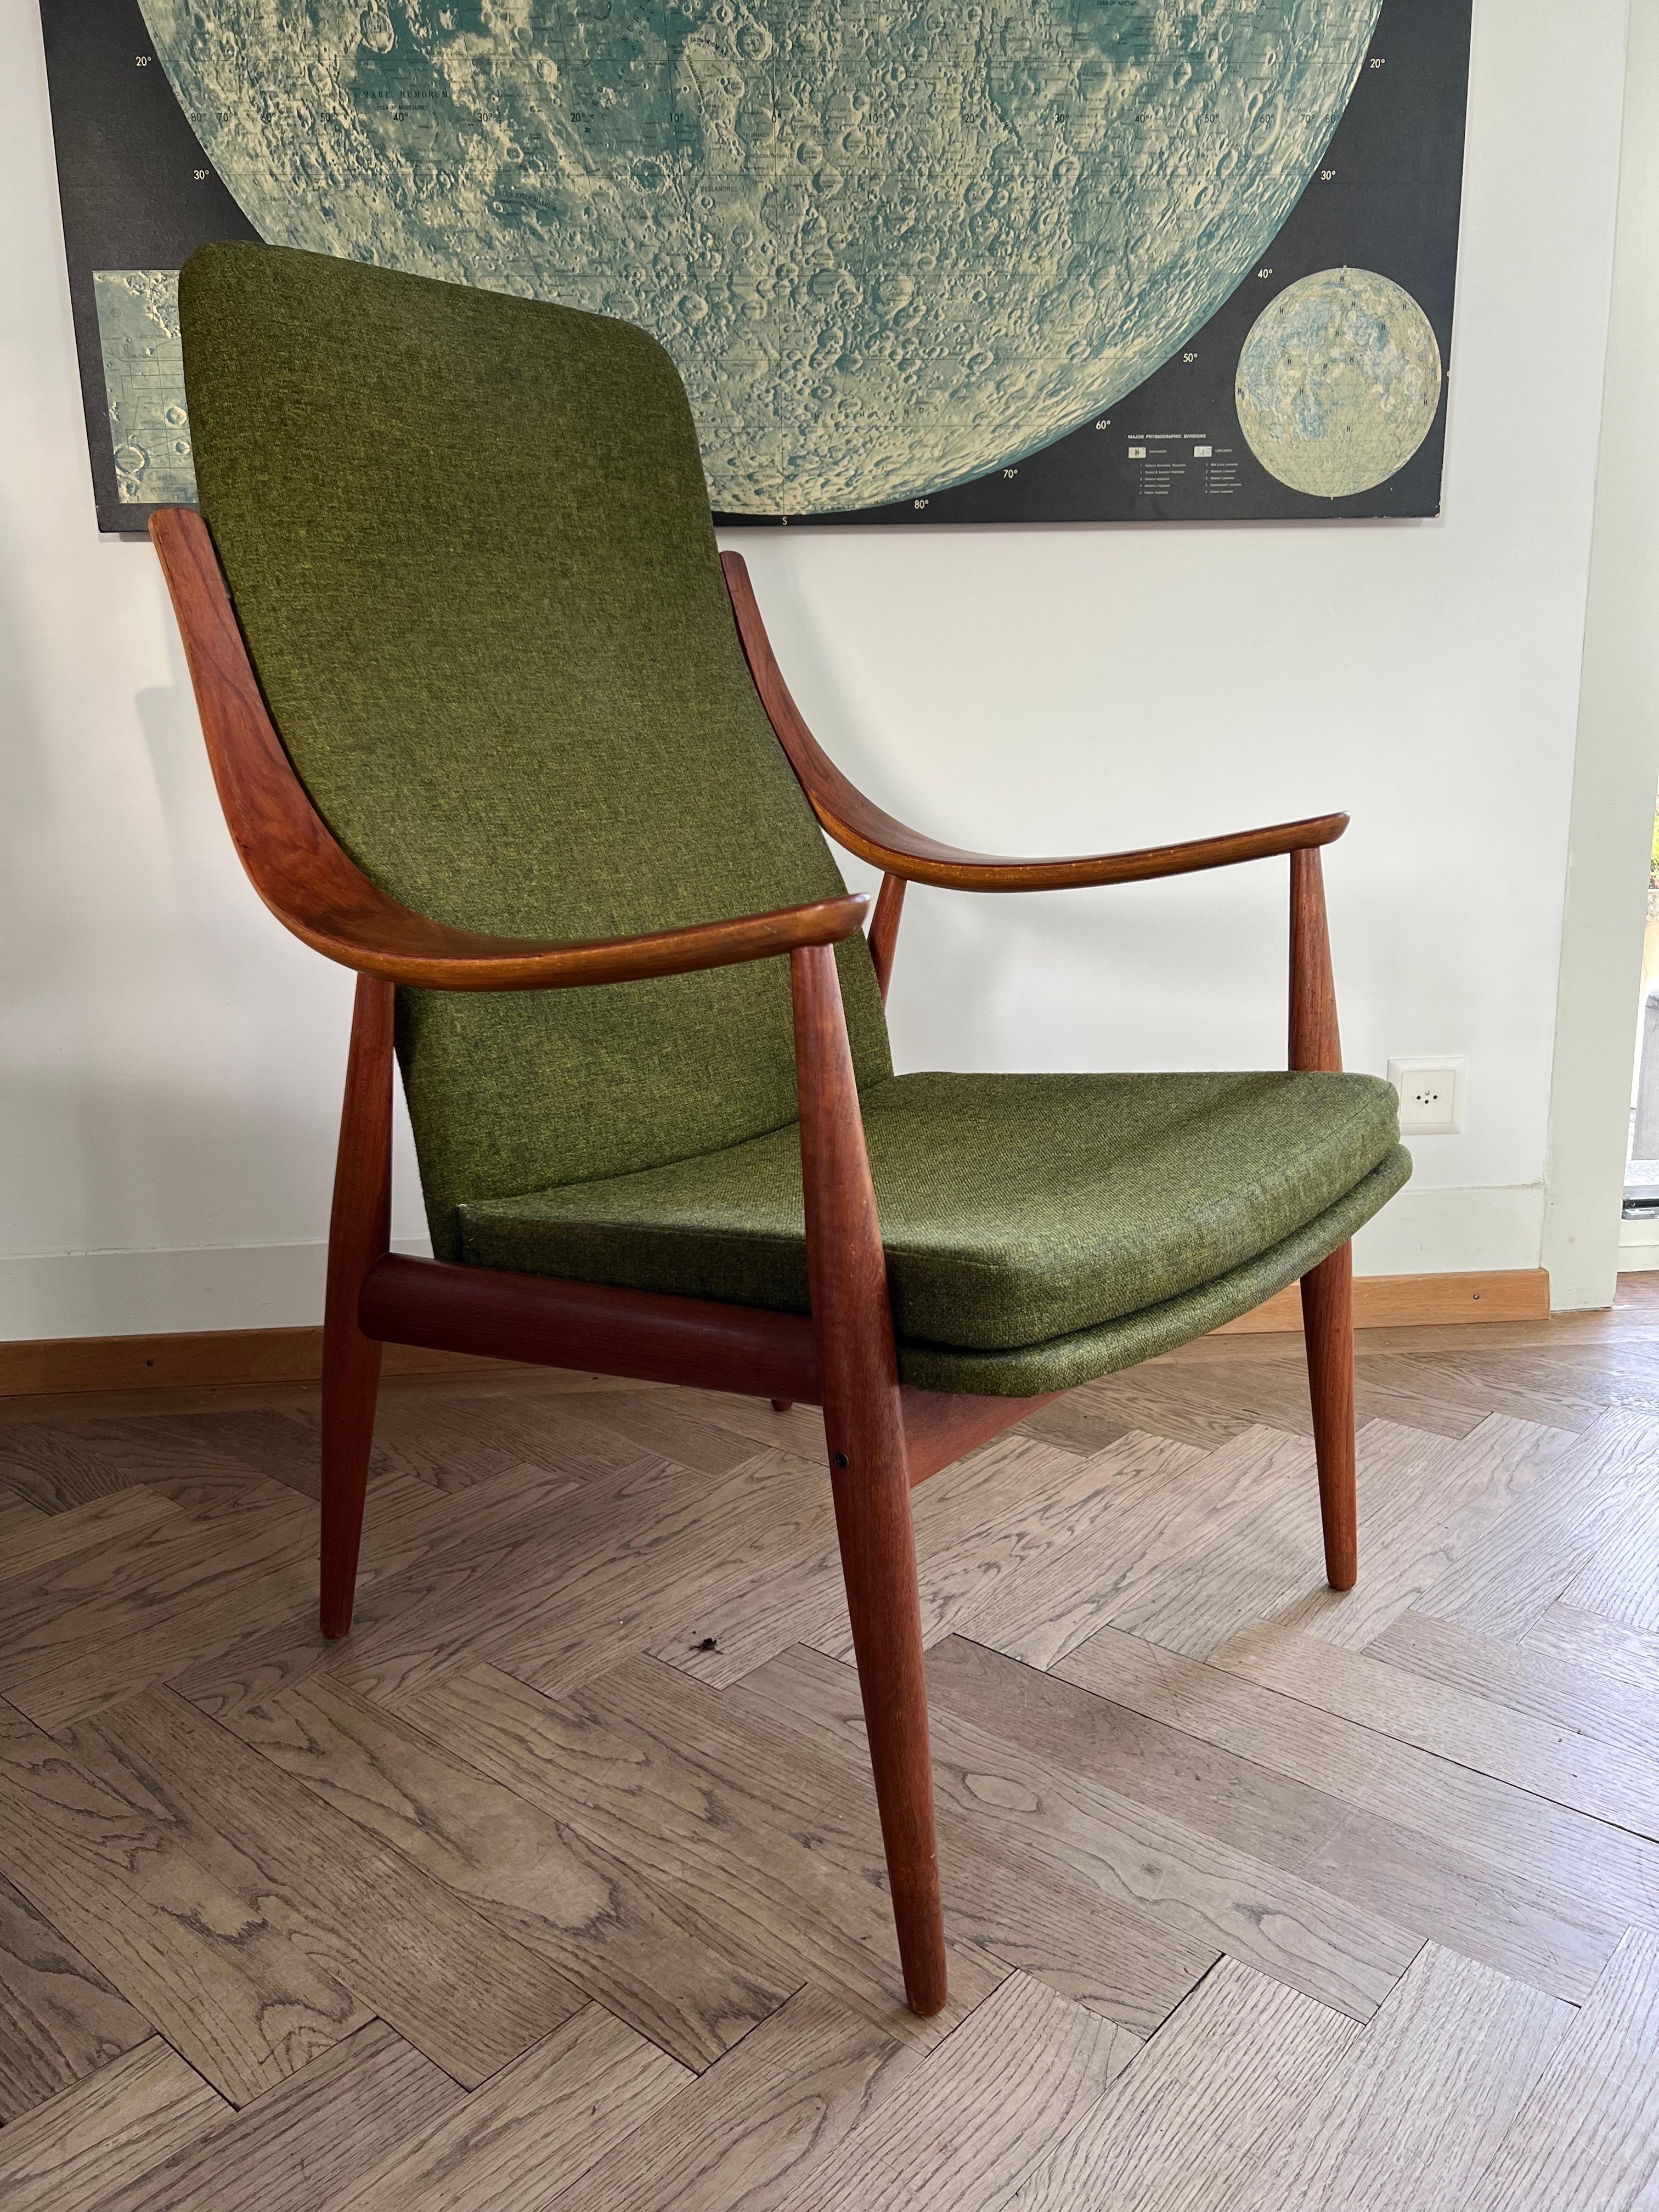 Vintage teak armchair by Hvidt and Orla Molgaard-Nielsen
Lounge chair model FD 145, designed in 1954 by Danish duo Peter Hvidt & Orla Mølgaard-Nielsen for their longtime collaborator France & Daverkosen (later renamed Franse & Søn). With high